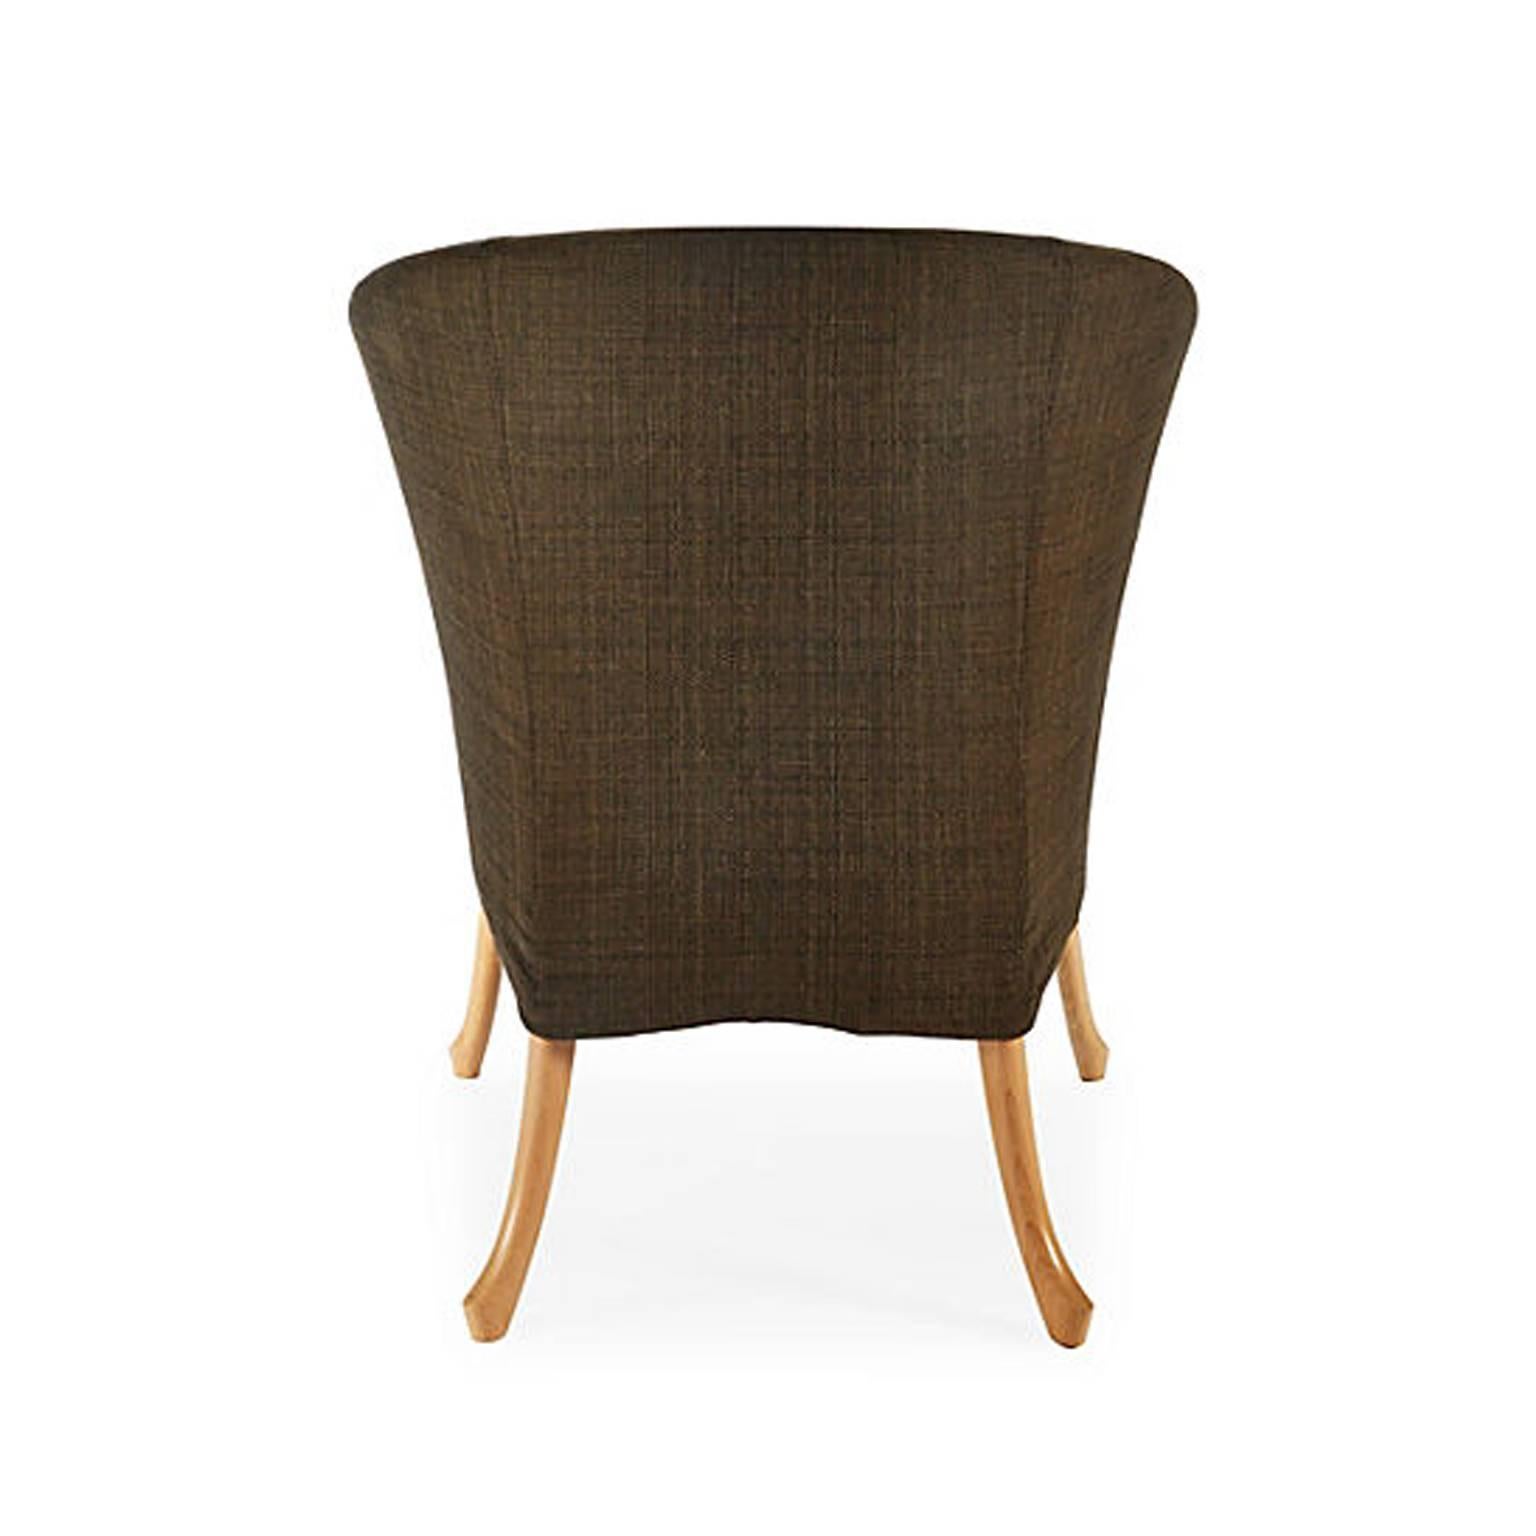 Giorgetti Progetti Armchair in Beechwood In Excellent Condition For Sale In Houston, TX